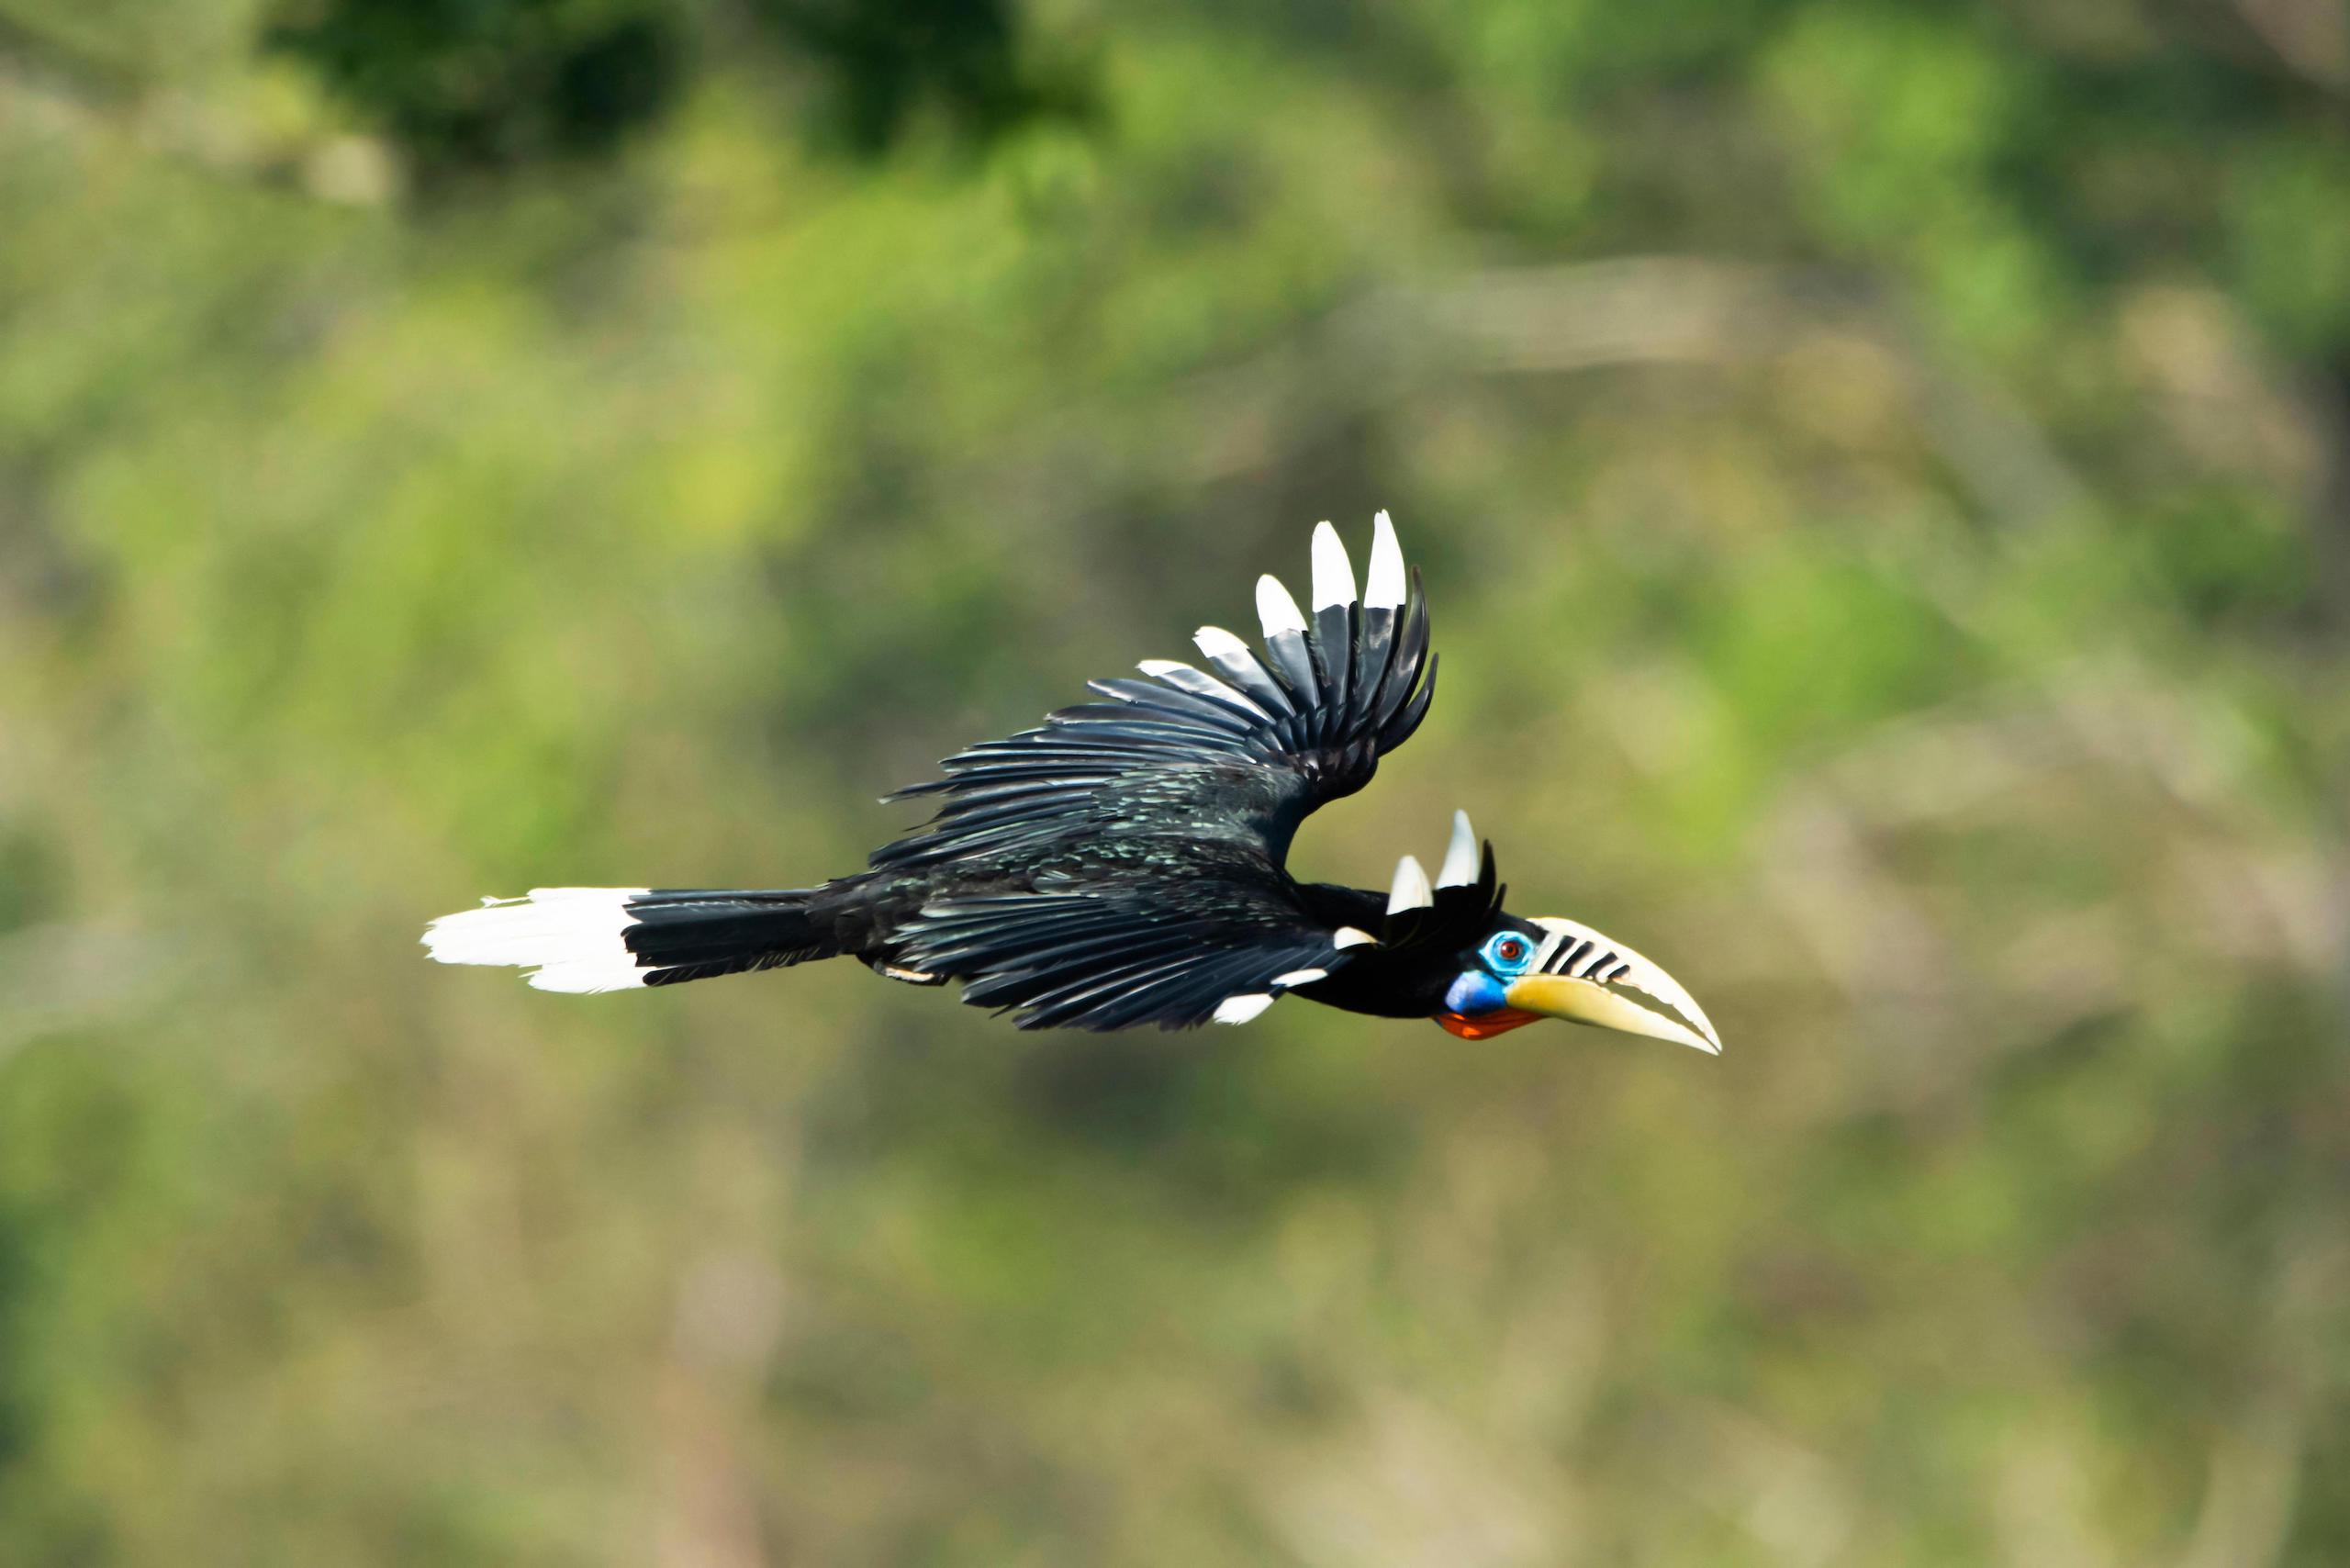 Rufous-necked hornbill, tropical bird flying against a soft focus forest background